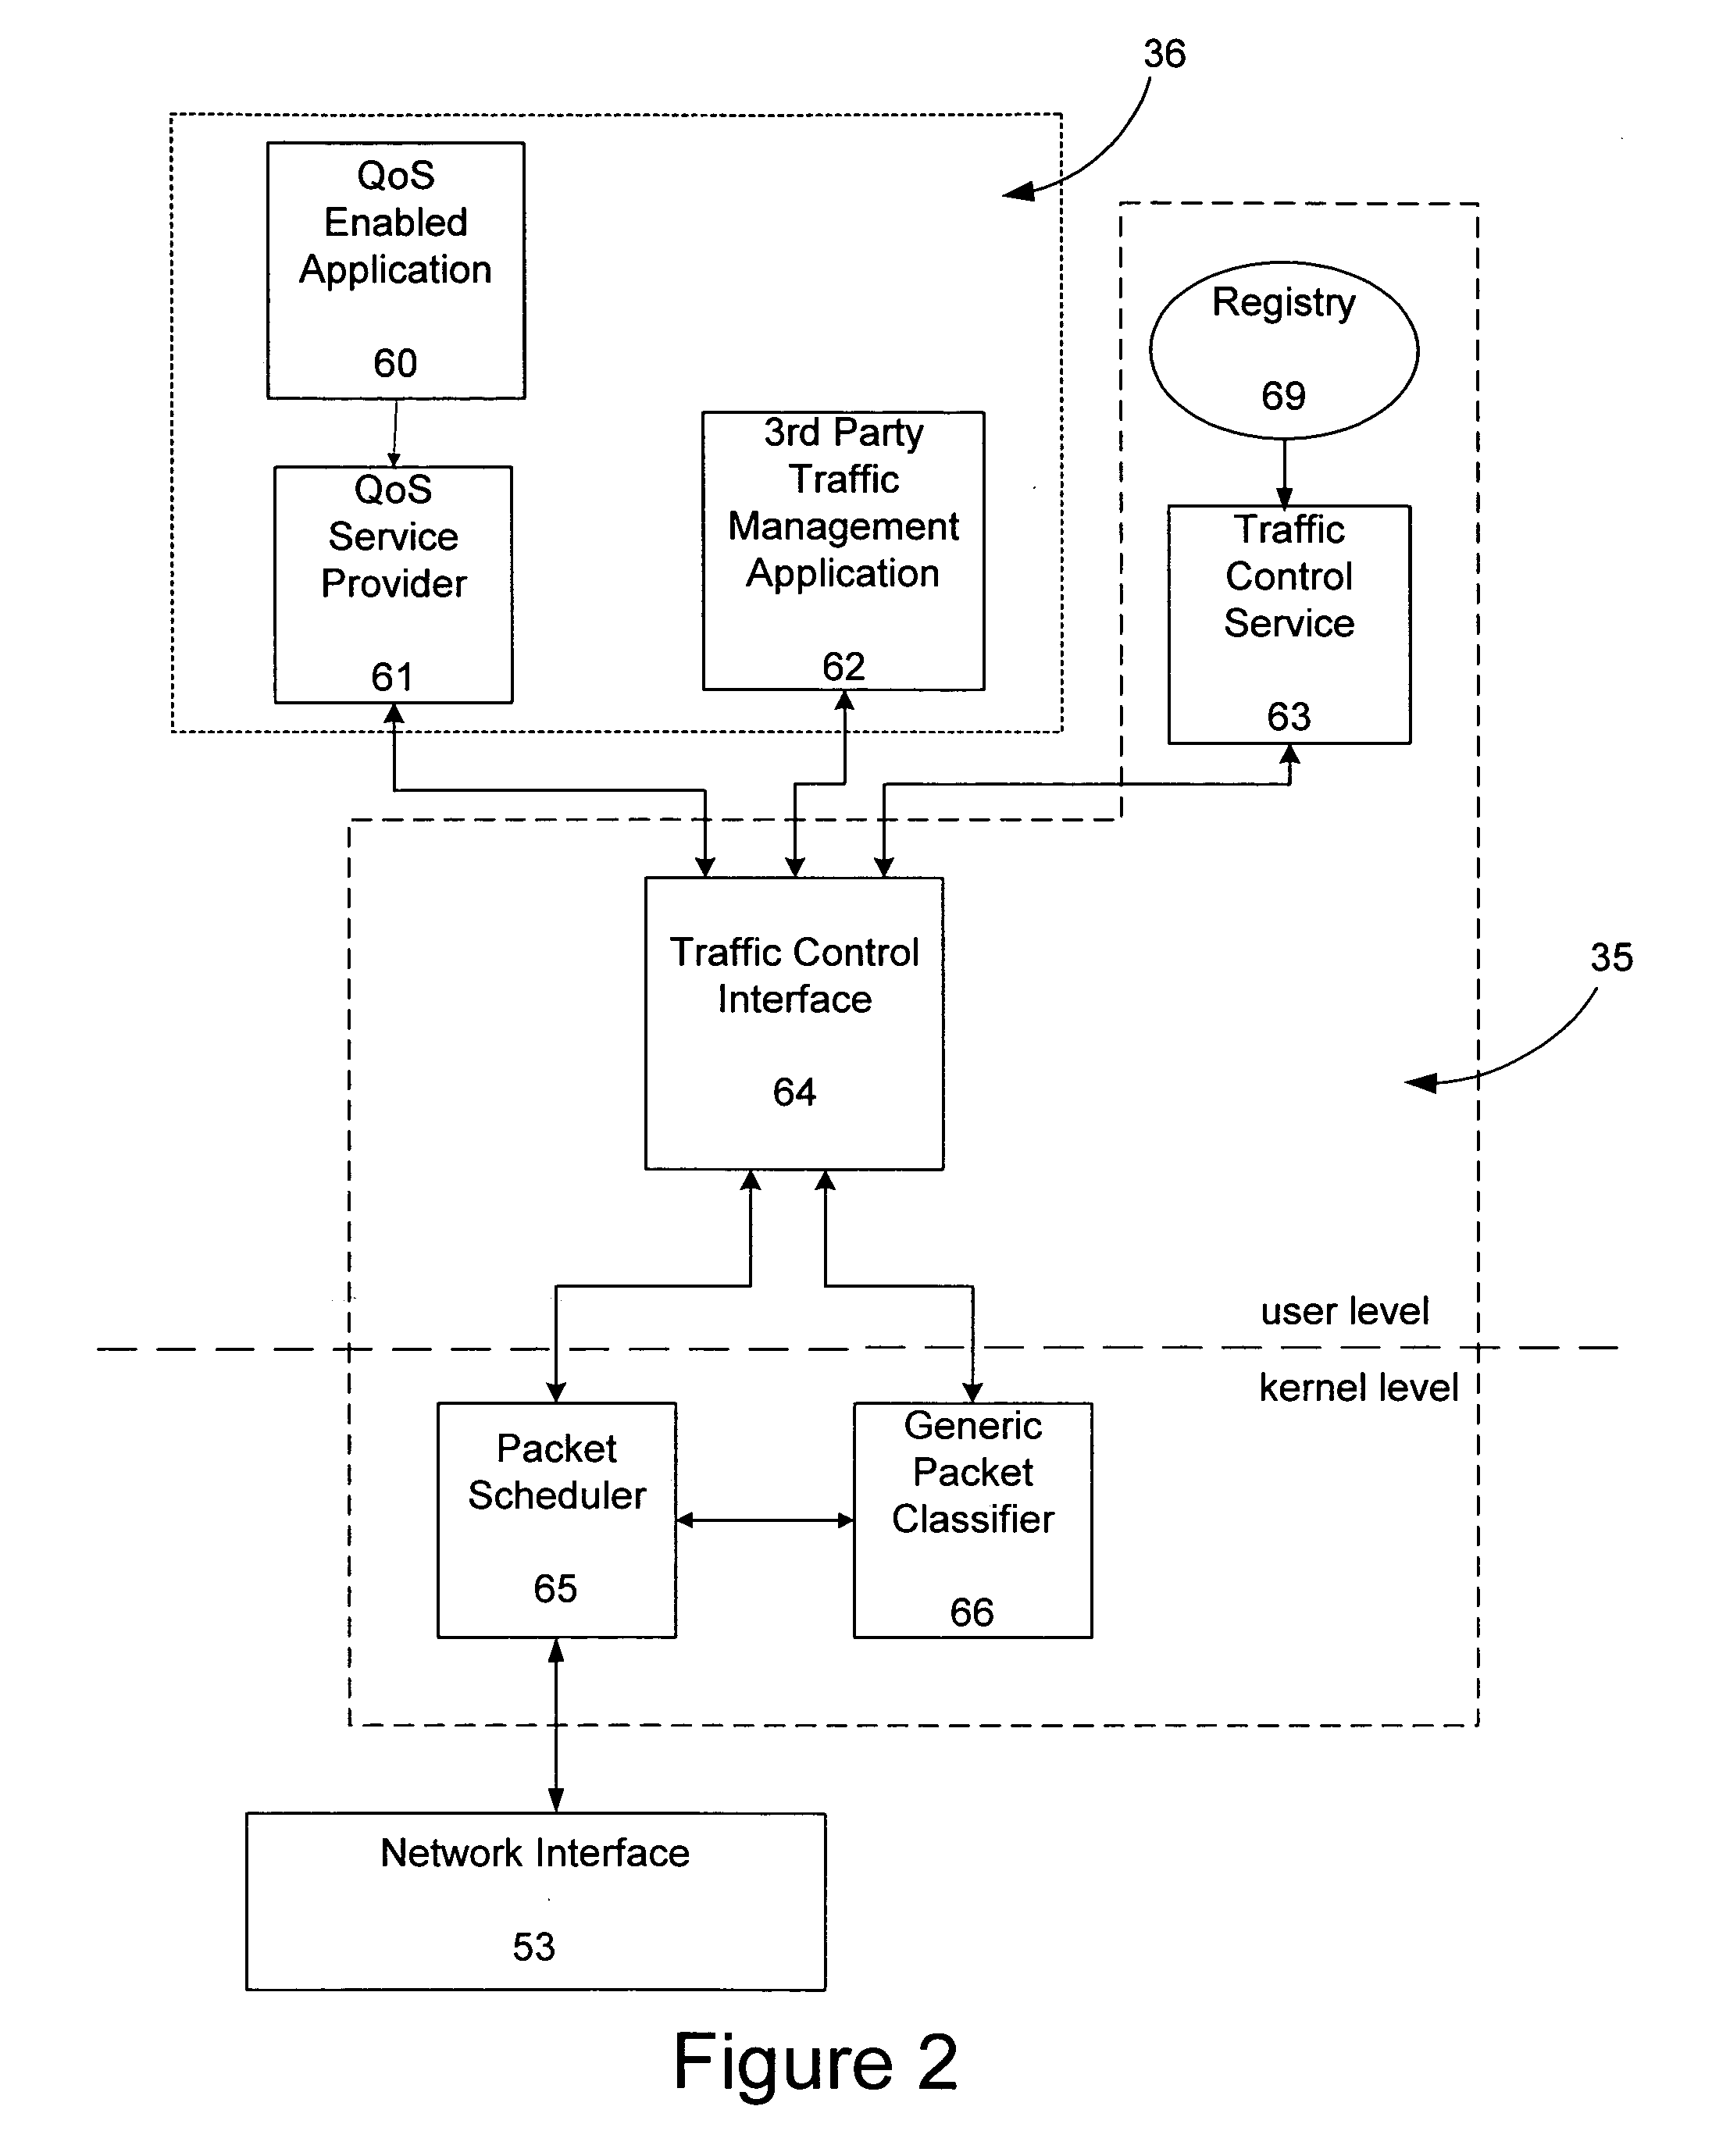 Method and system of a traffic control application programming interface for abstracting the use of kernel-level traffic control components